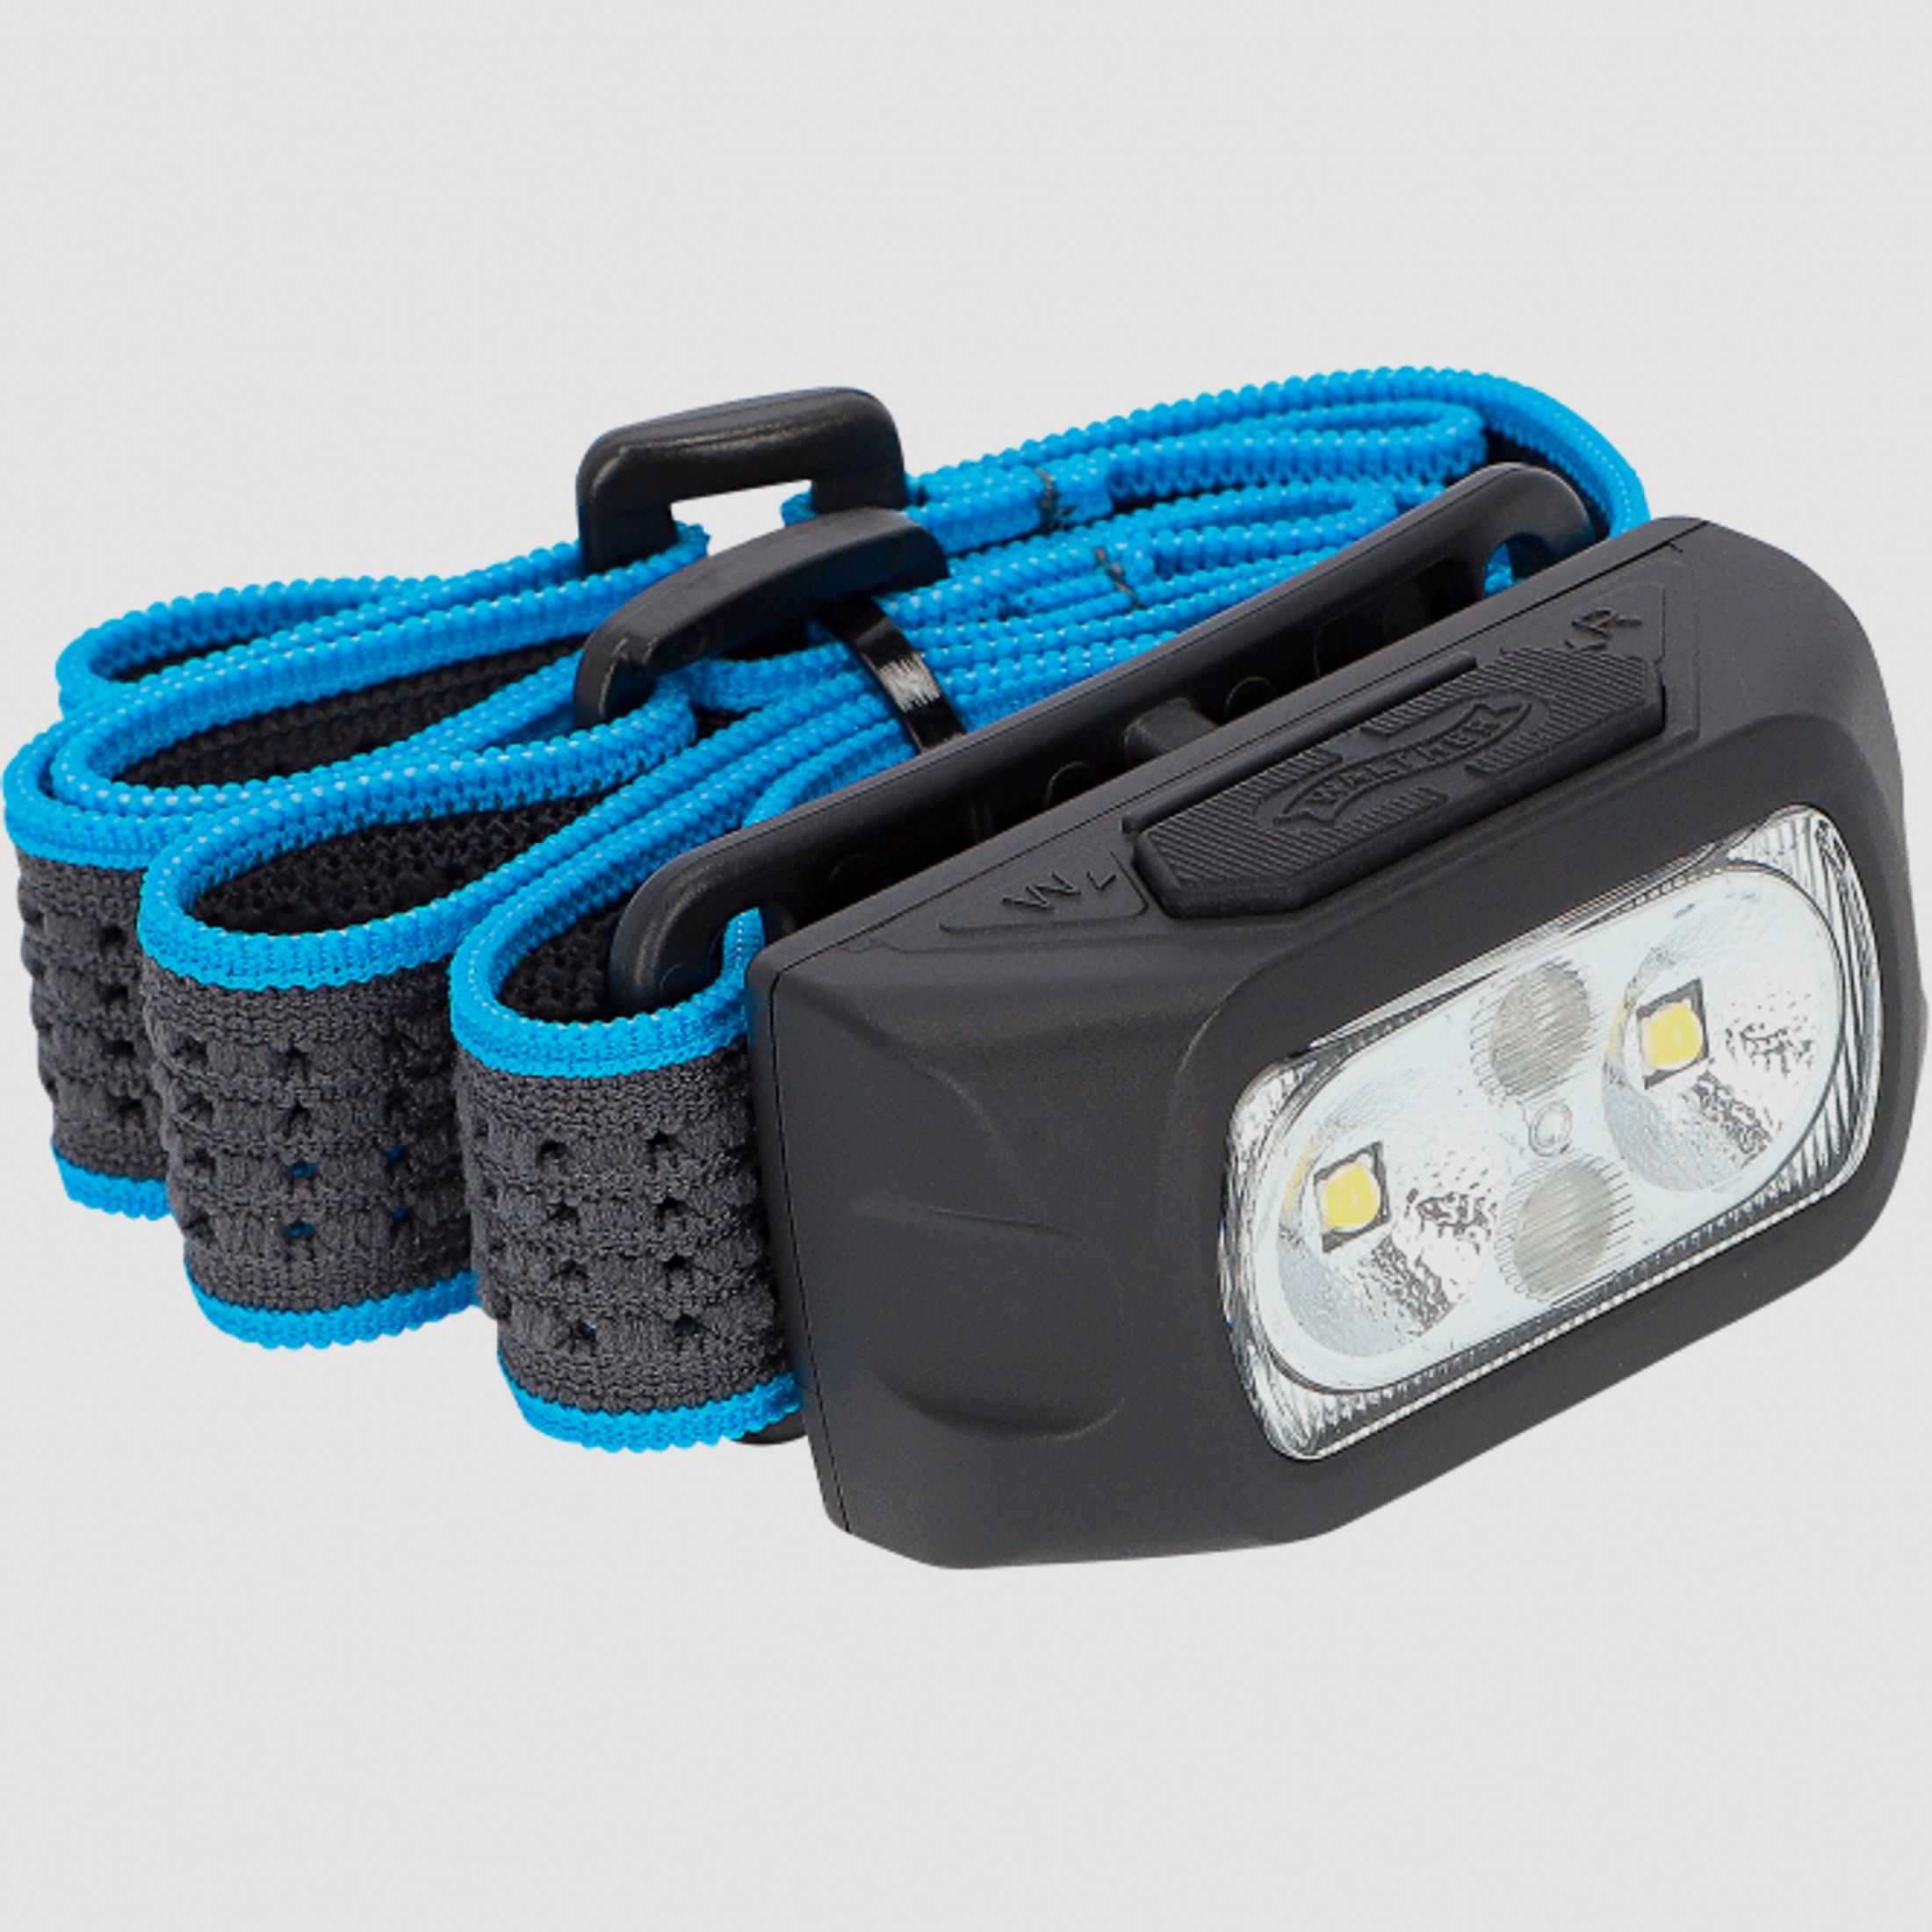 Walther       Walther   Headlamp i1 rechargeable